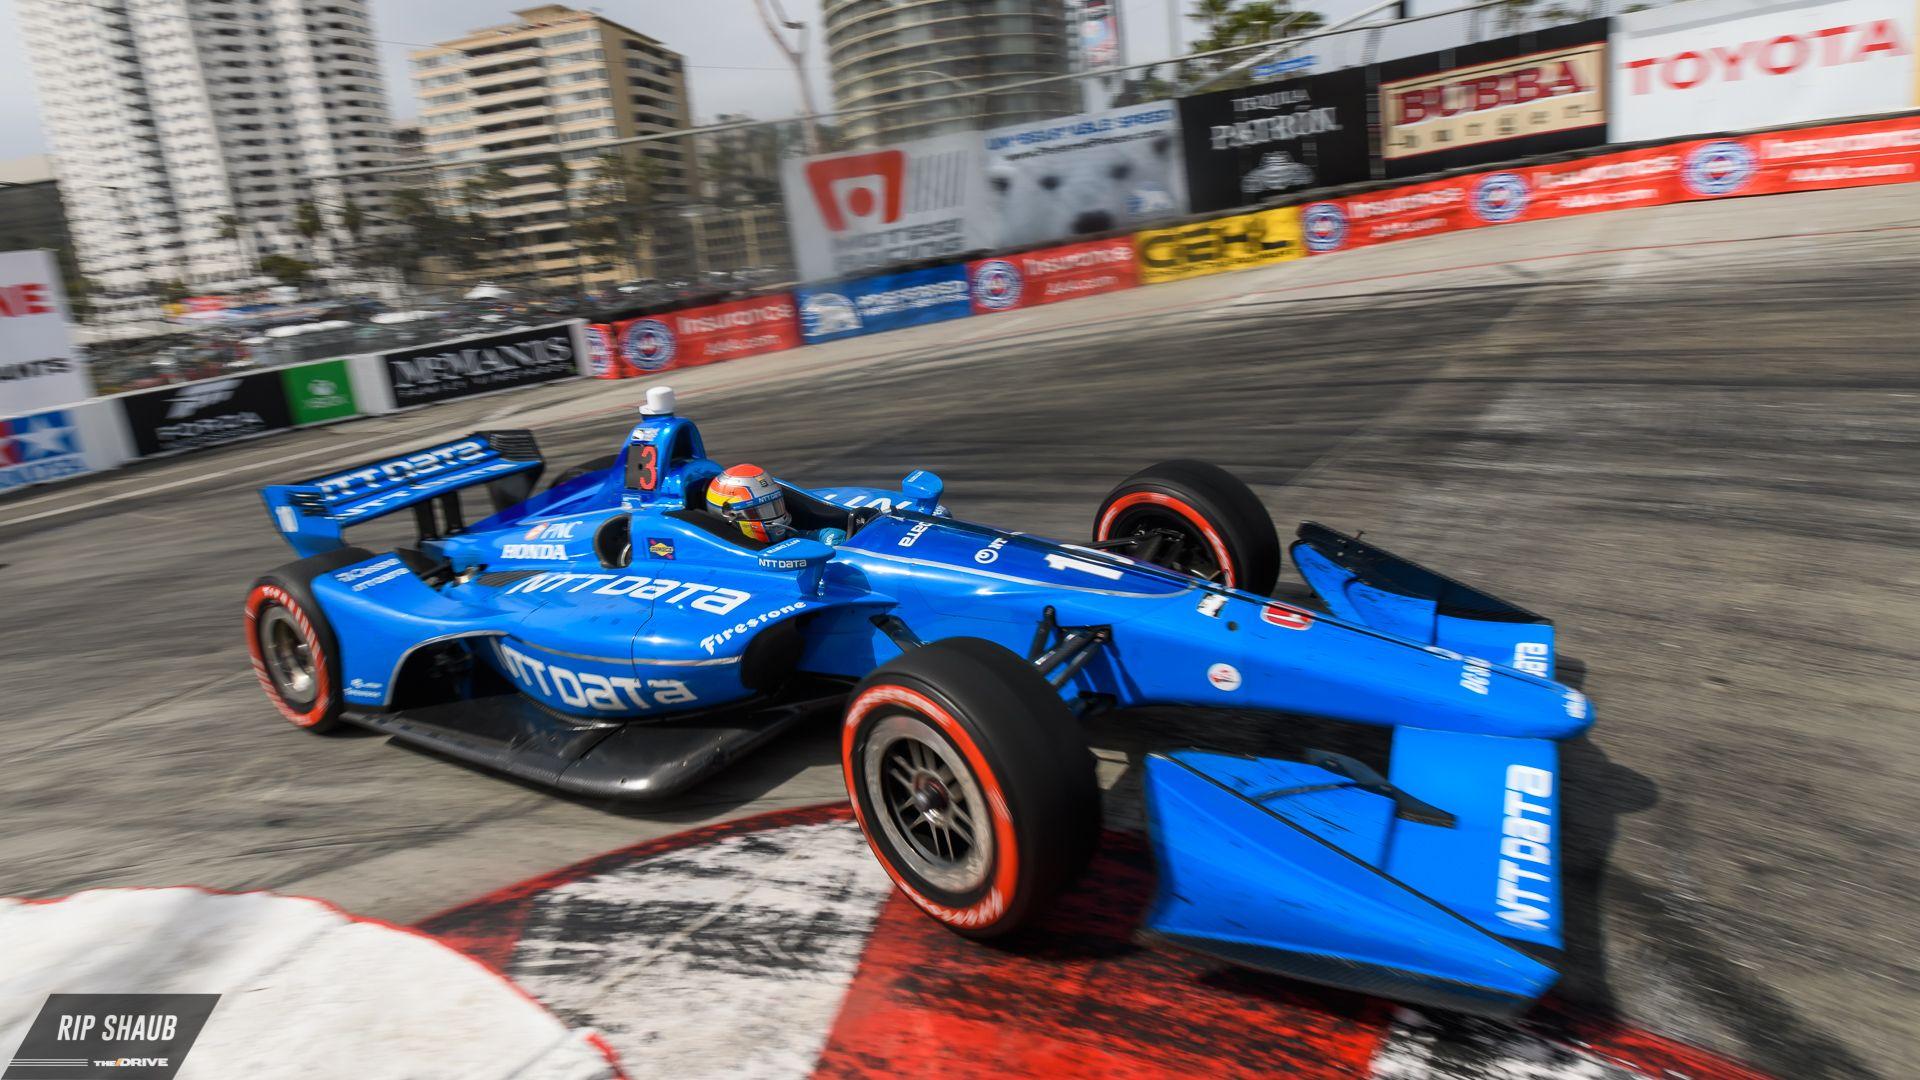 Alexander Rossi Wins 2018 IndyCar Grand Prix of Long Beach From Pole